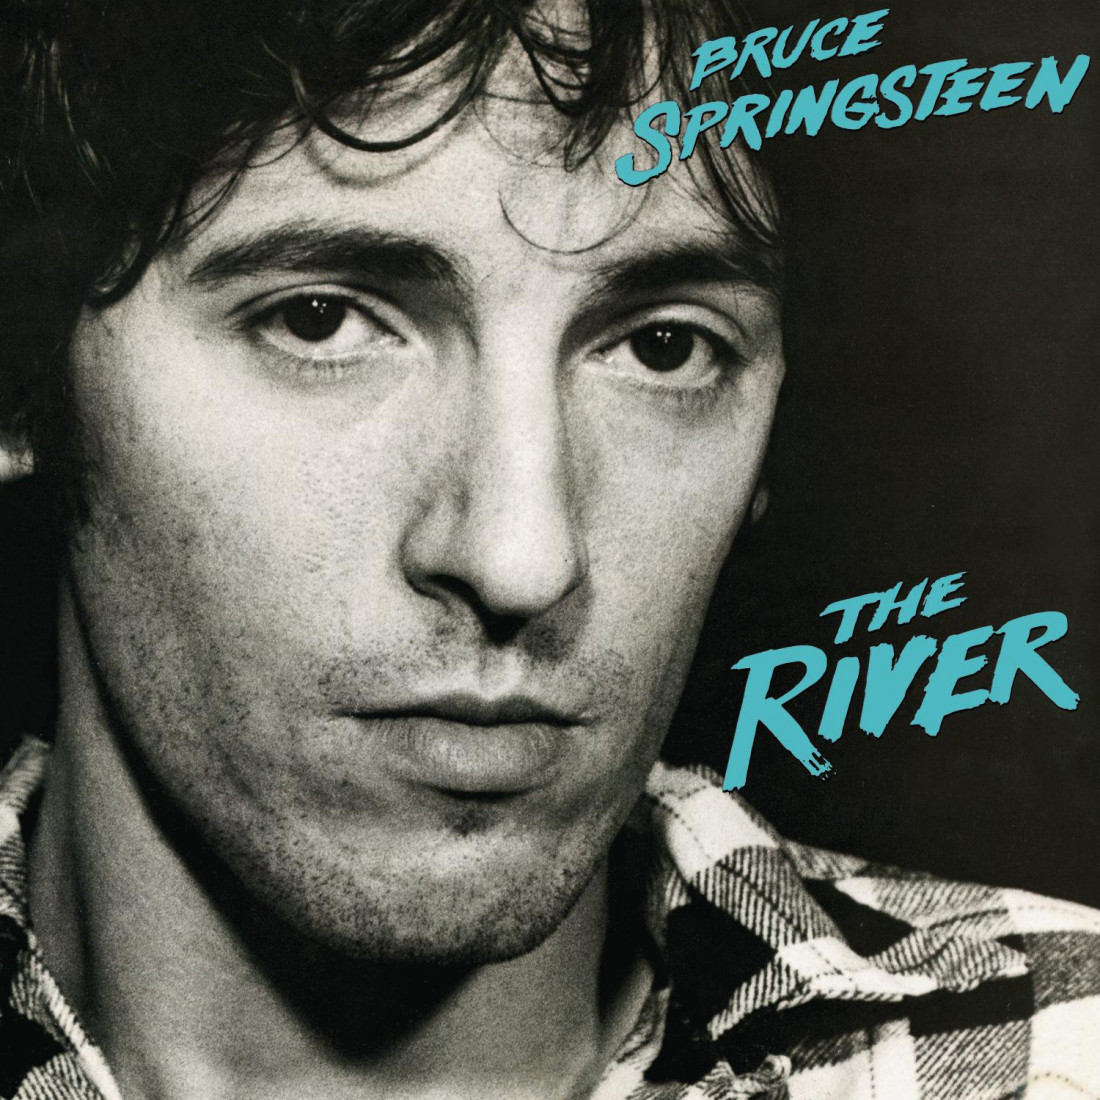 [Bruce Springsteen] The River Photo-Image